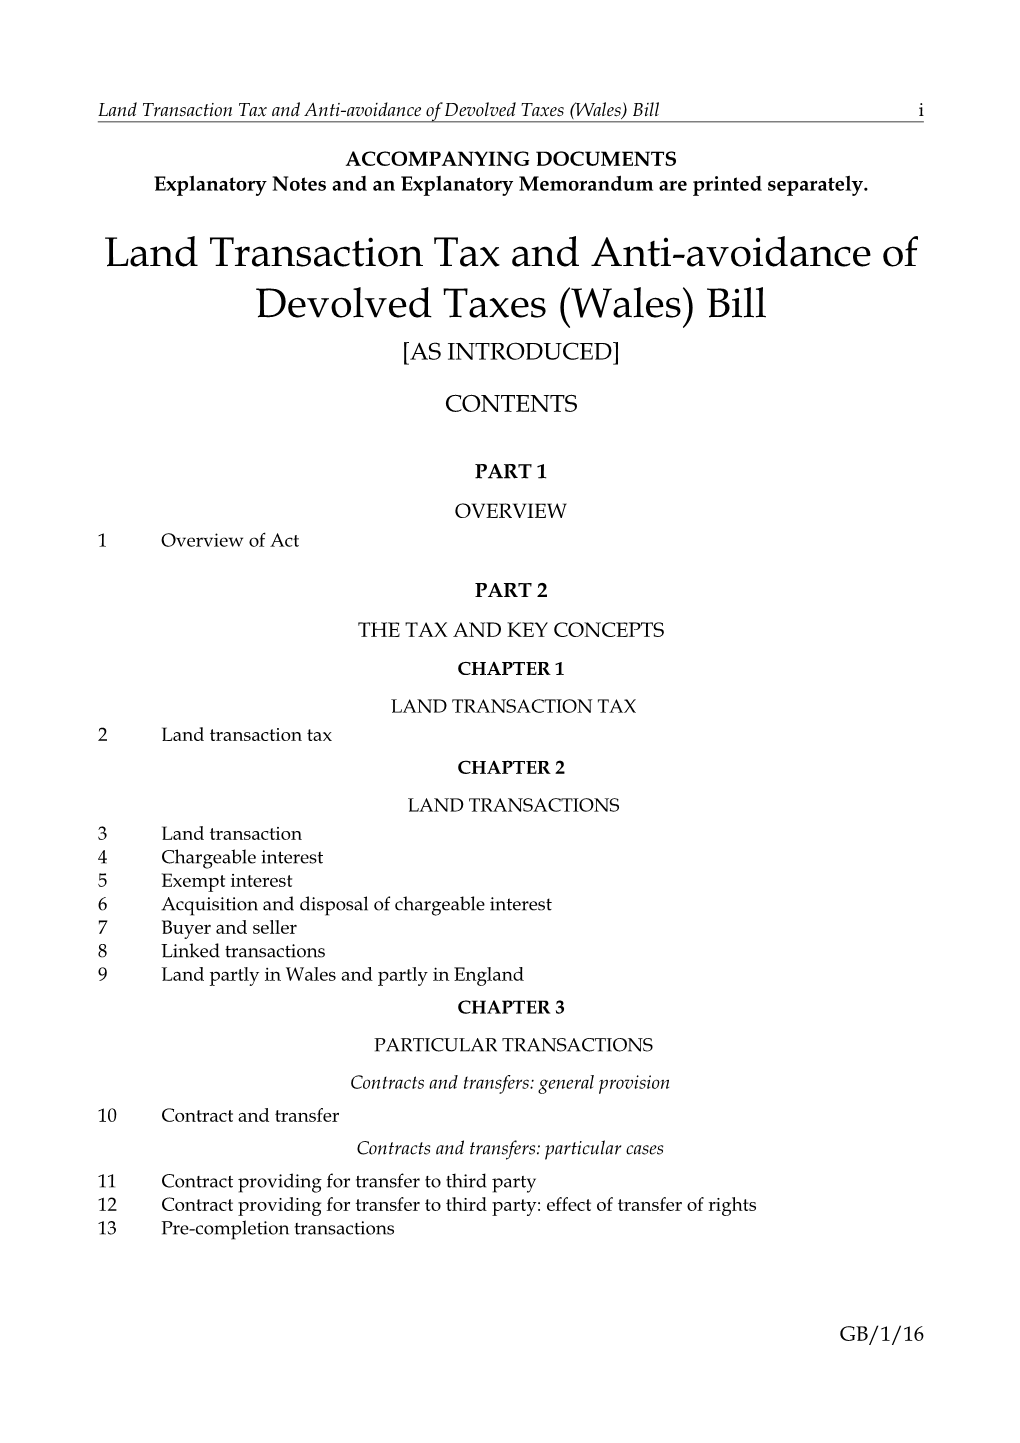 Land Transaction Tax and Anti-Avoidance of Devolved Taxes (Wales) Bill I